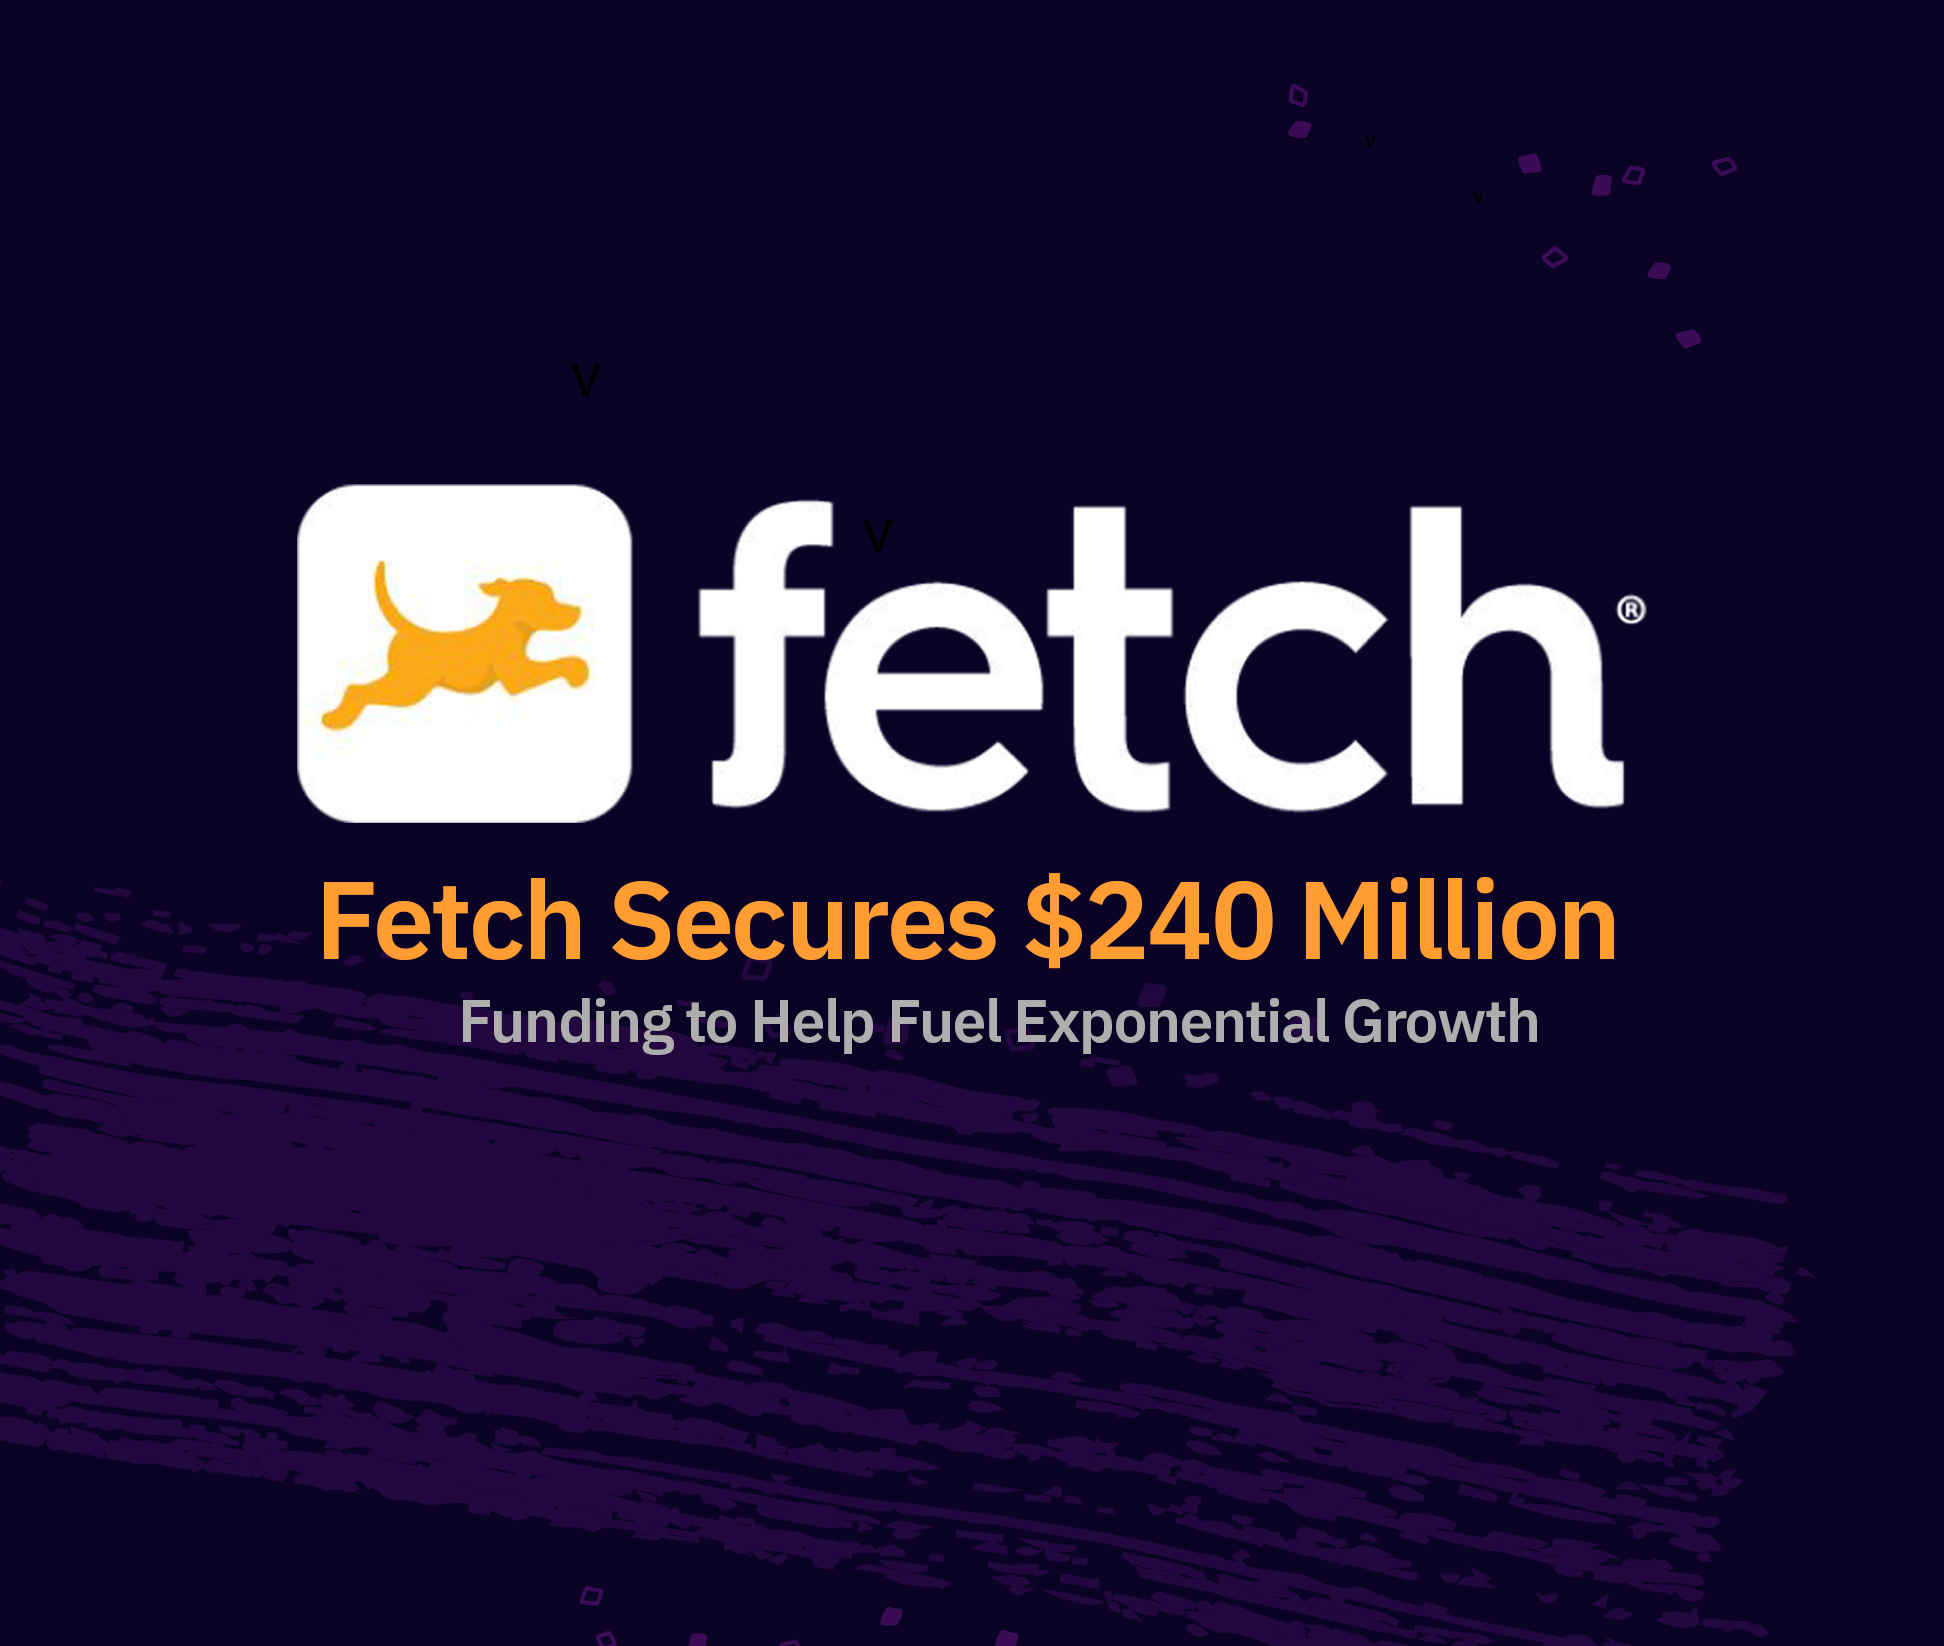 Fetch Secures $240 Million to Help Fuel Exponential